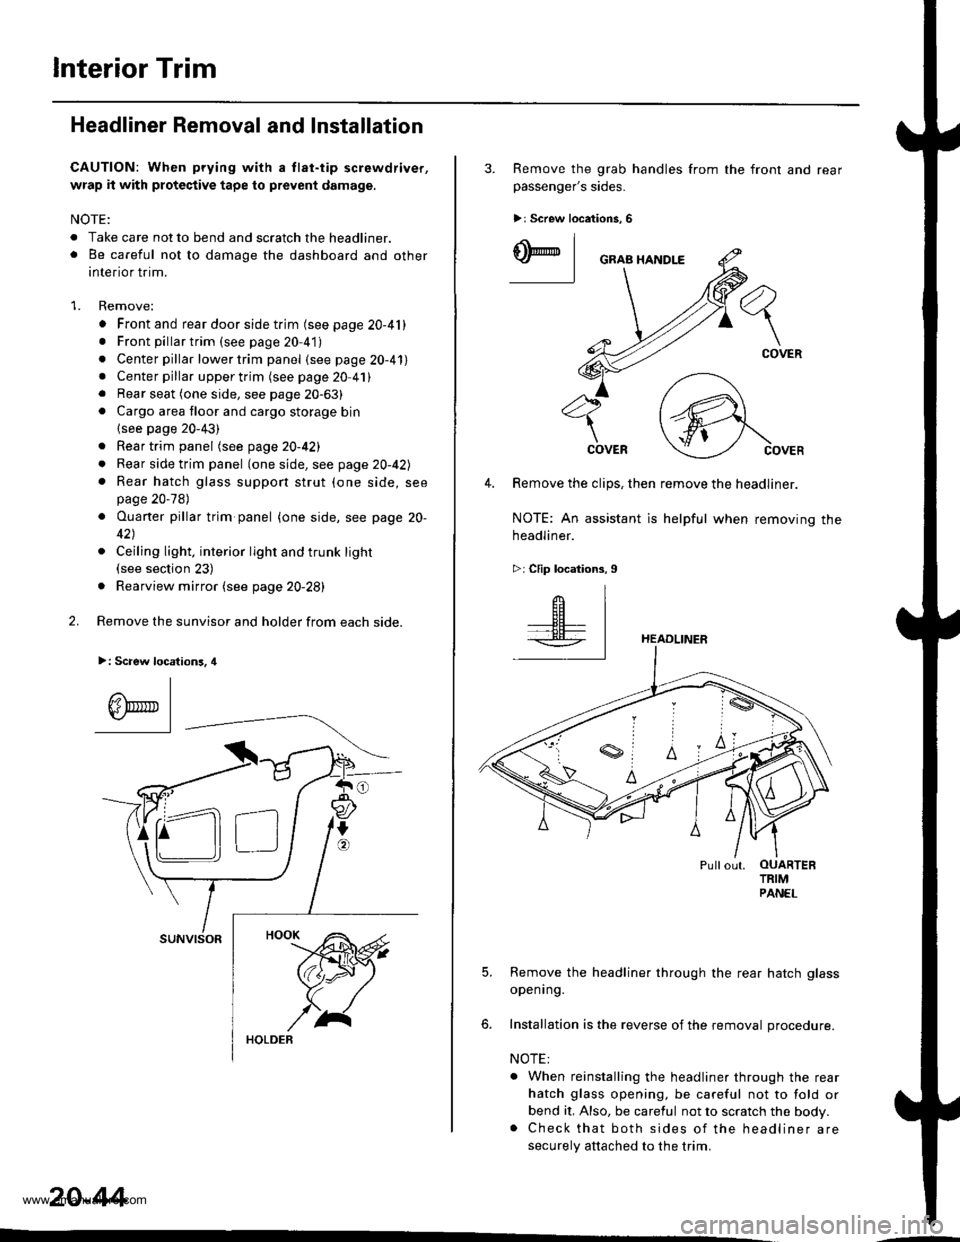 HONDA CR-V 1998 RD1-RD3 / 1.G User Guide 
lnterior Trim
Headliner Removal and Installation
CAUTION: When prying with a tlat-tip screwdriver,
wrap it with protective tape to prevent damage.
NOTE:
. Take care not to bend and scratch the headli